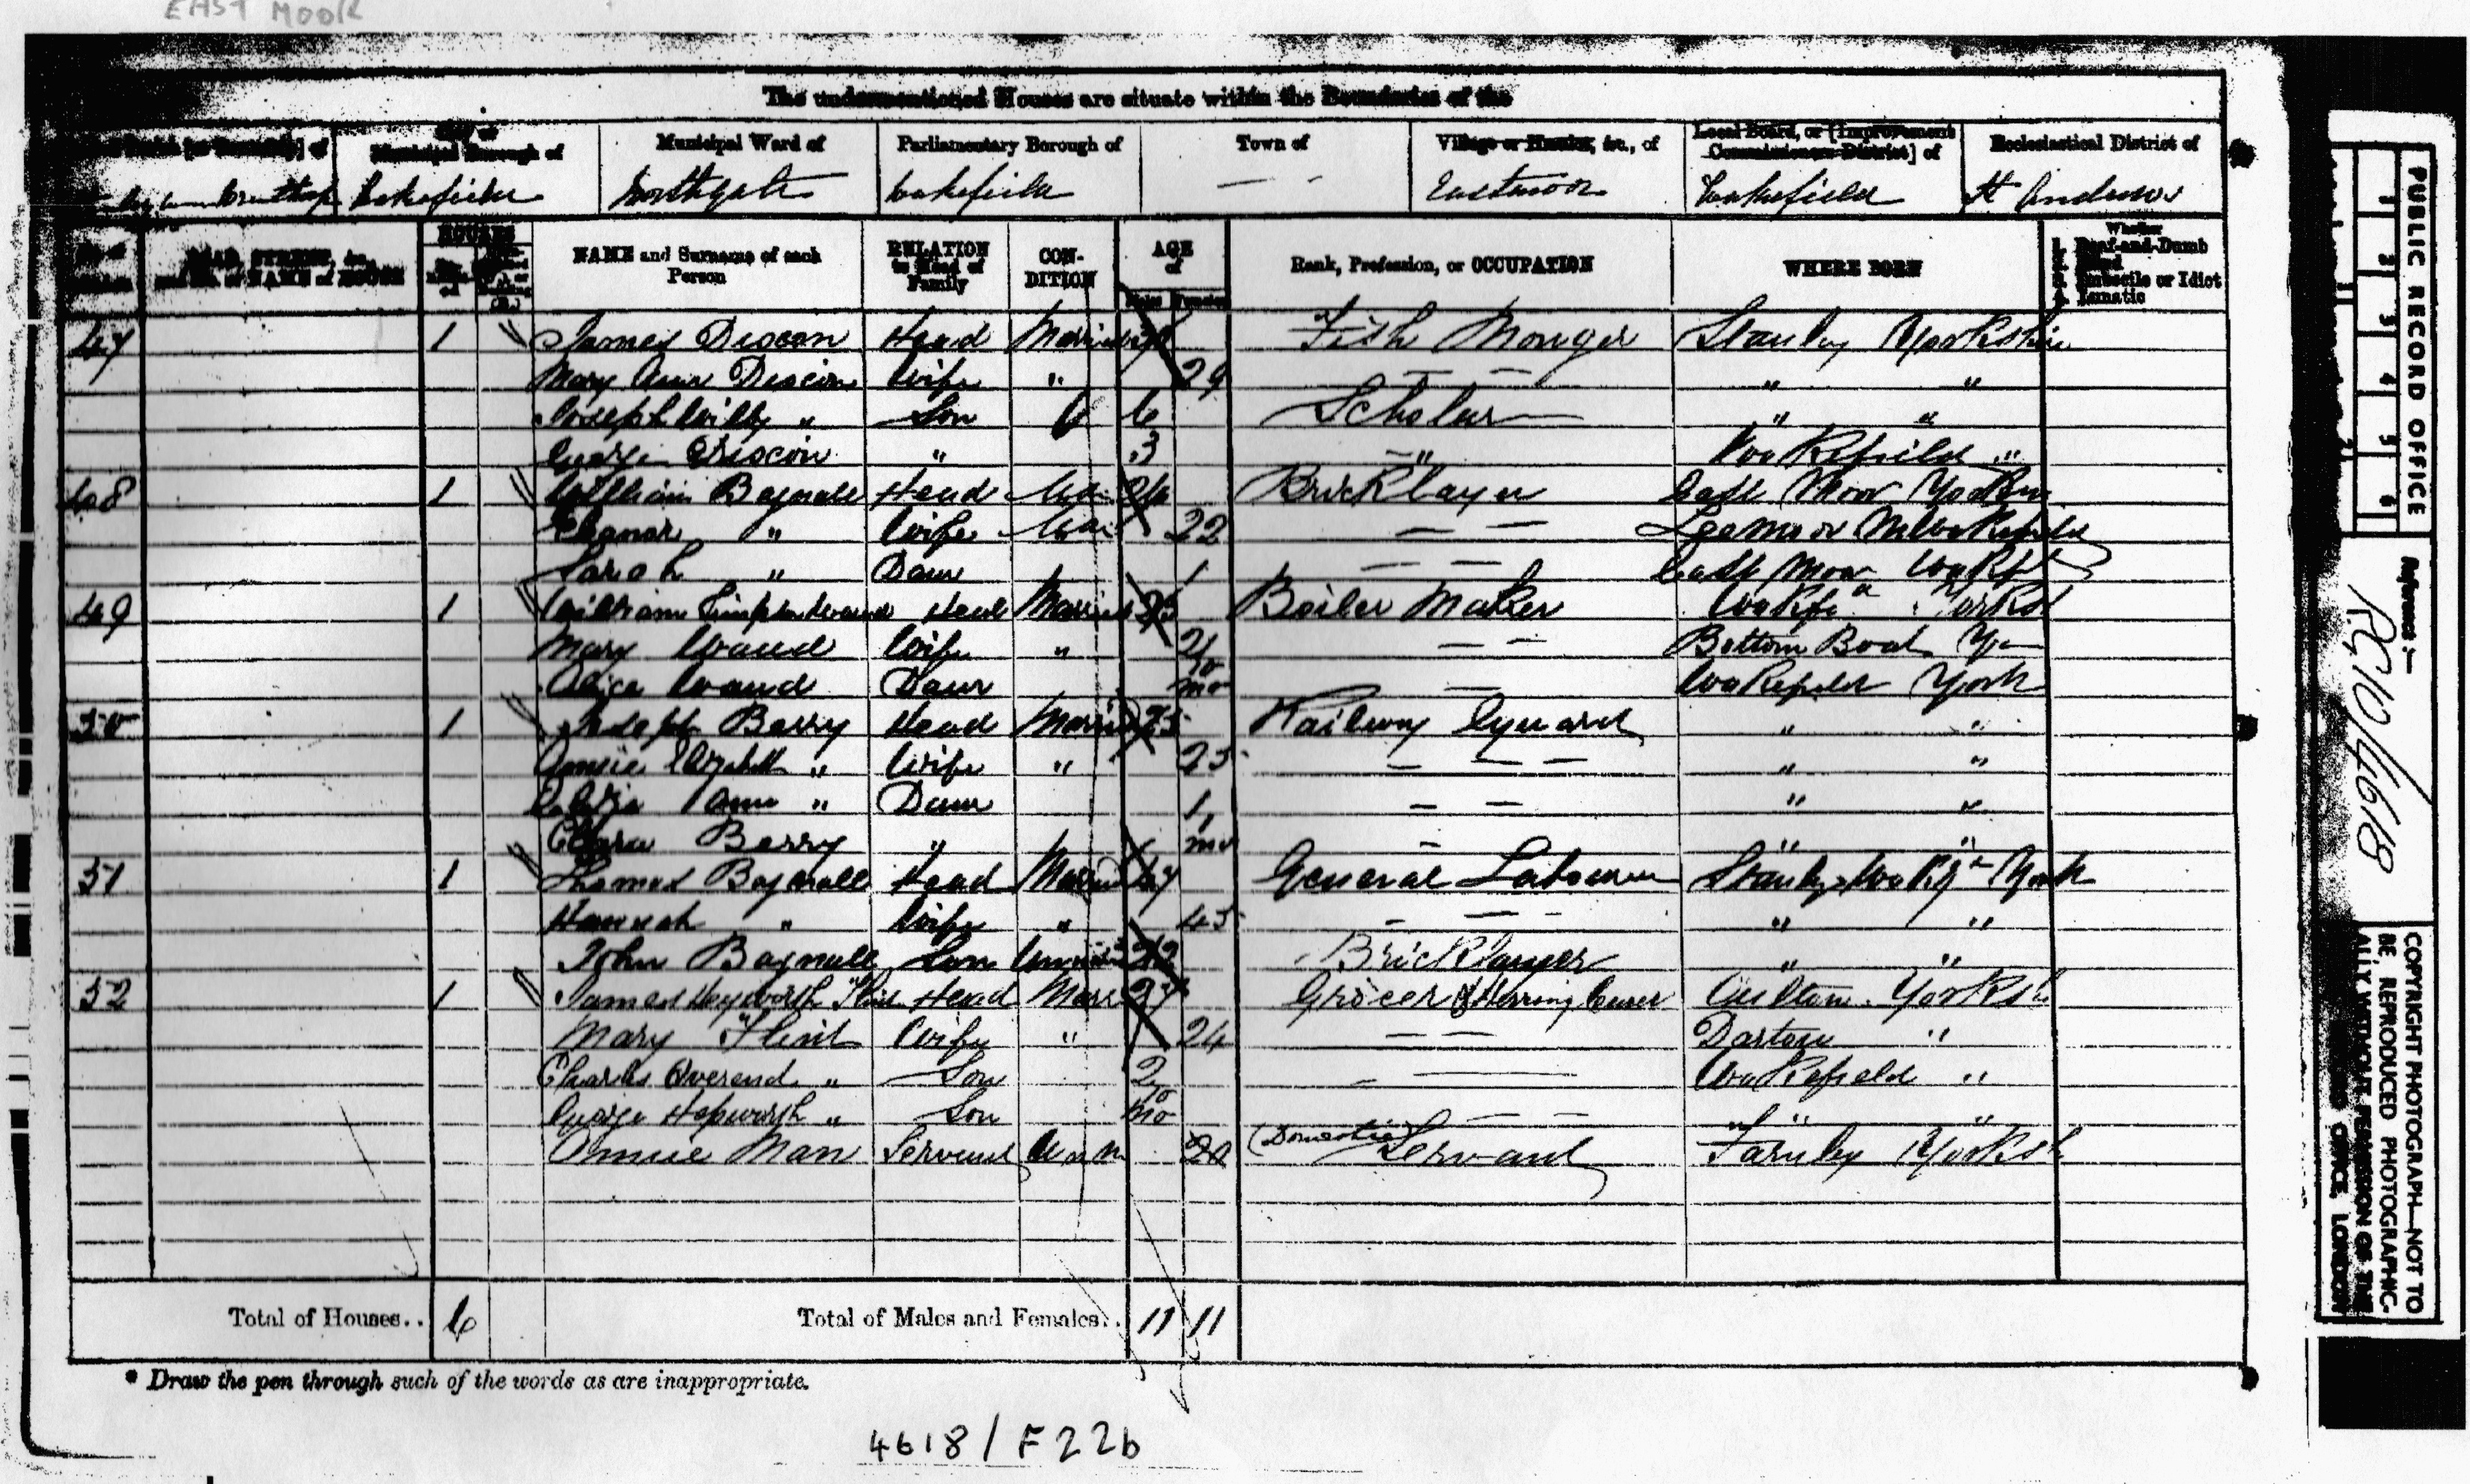 1871 Census entry for Thomas and Hannah Bagnall Household